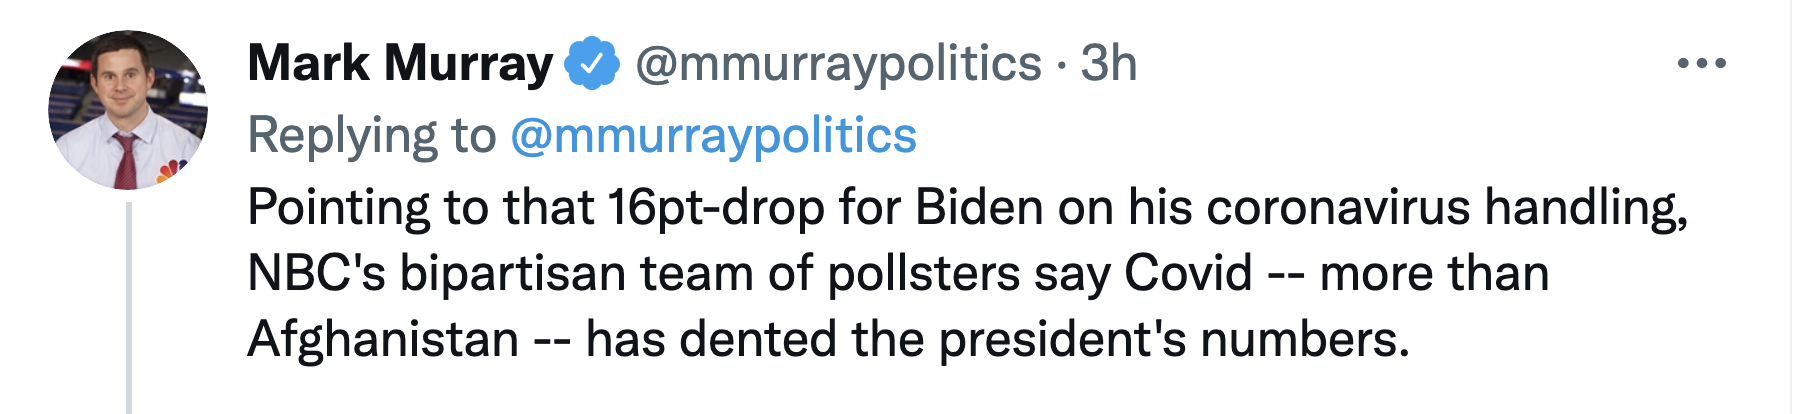 Screen-Shot-2021-08-22-at-11.08.16-AM Latest Biden Approval Polling Has Republicans Running Scared Featured Media Politics Terrorism Top Stories 